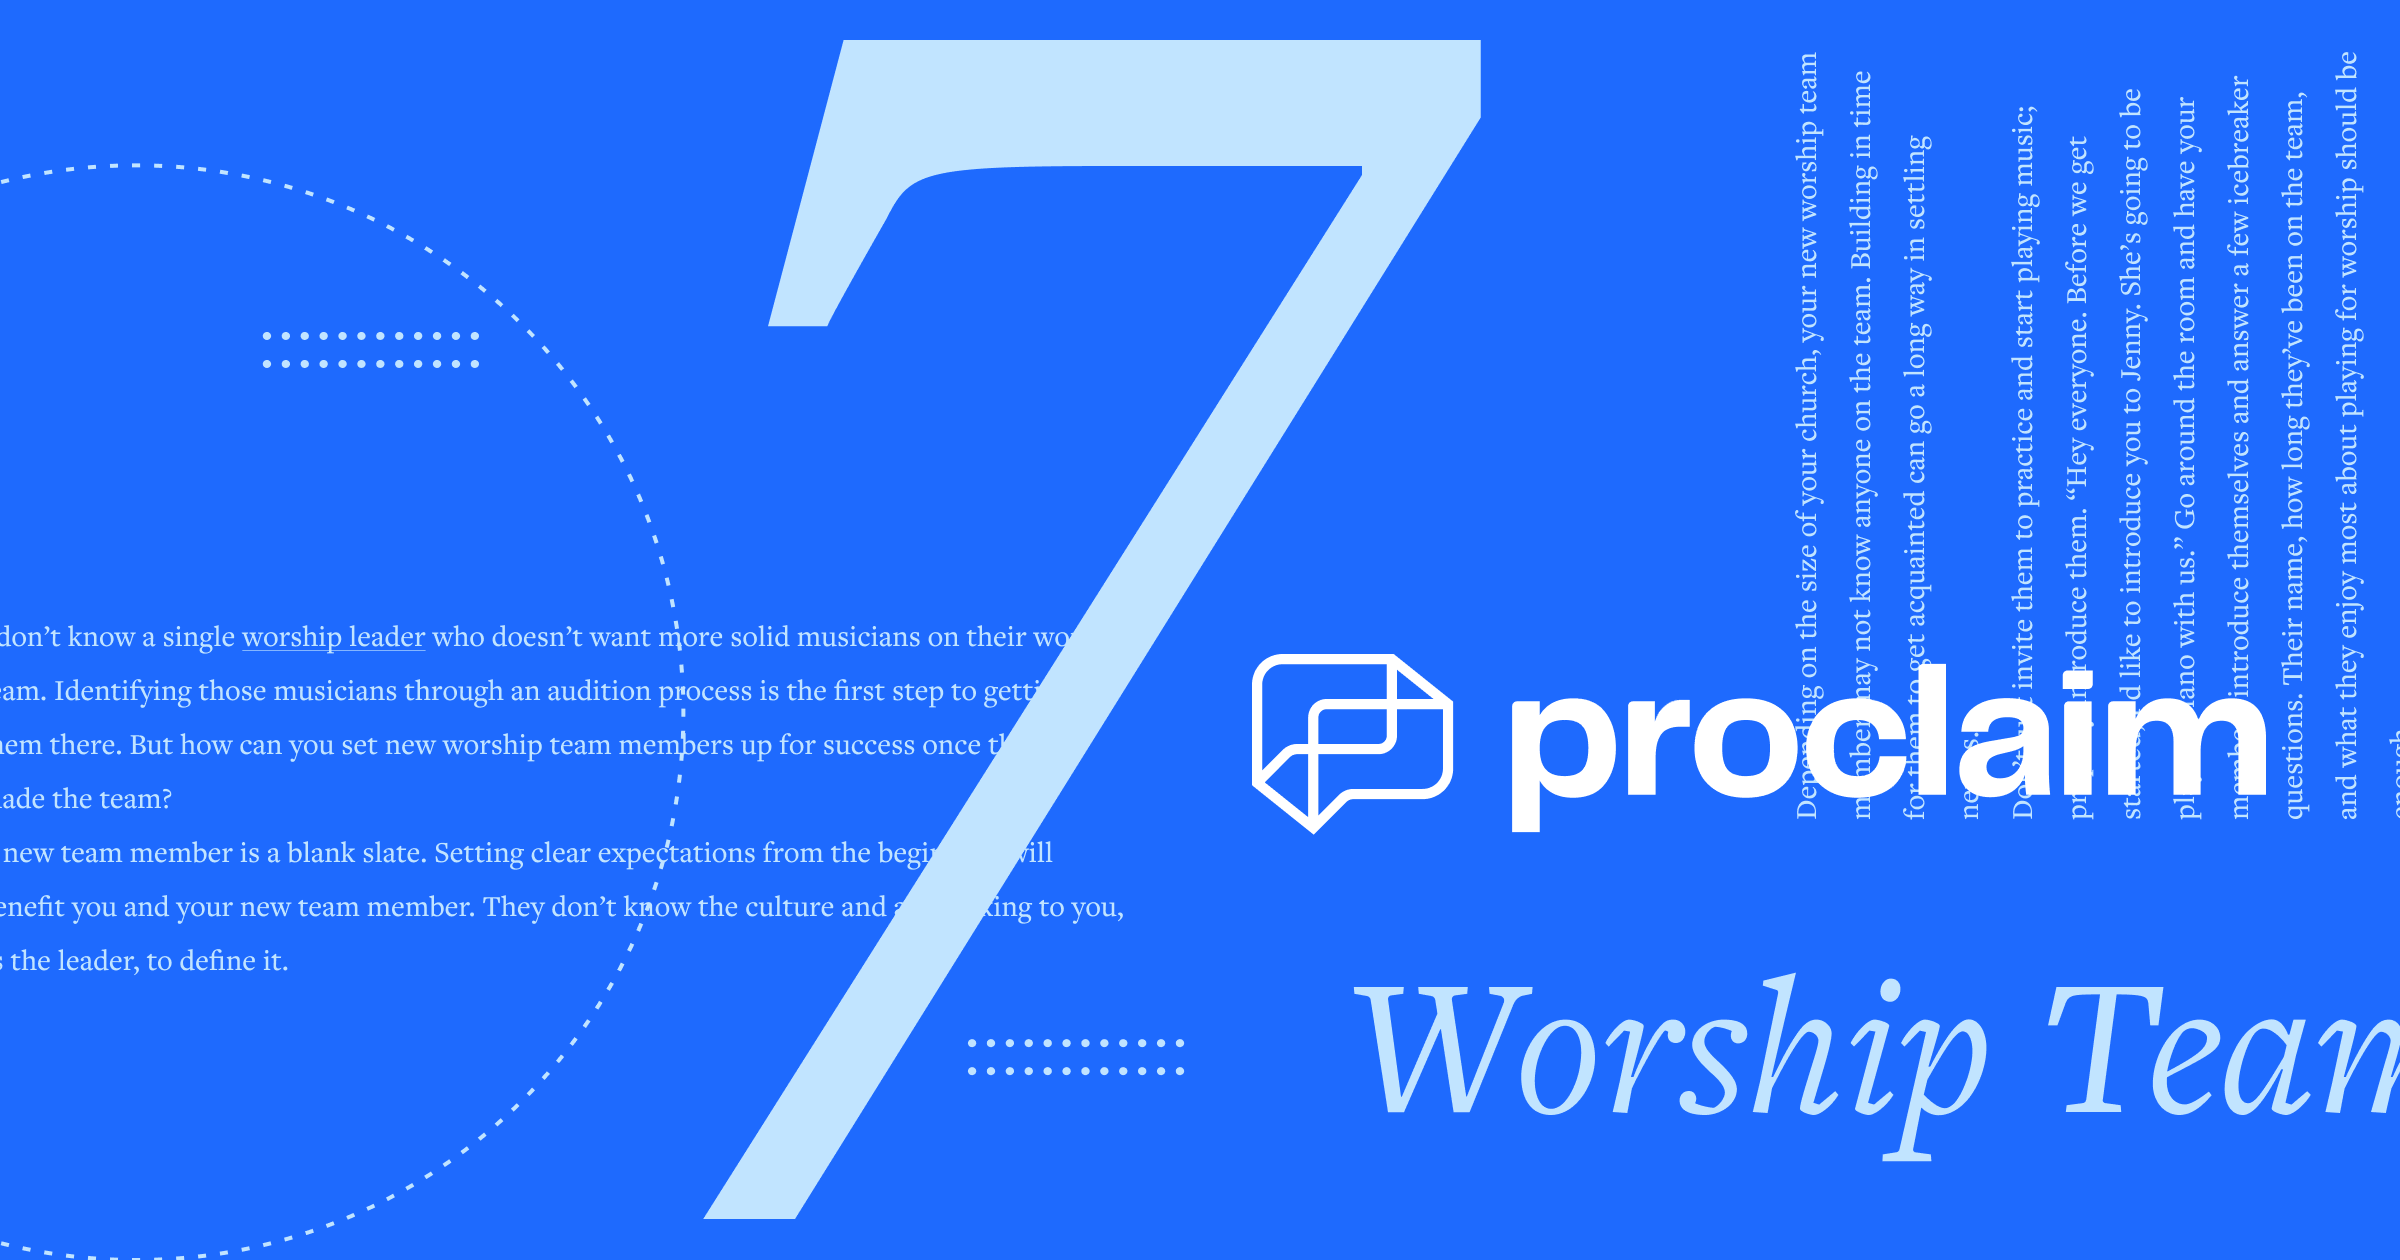 Word collage with Proclaim, 7, and worship team written on it.